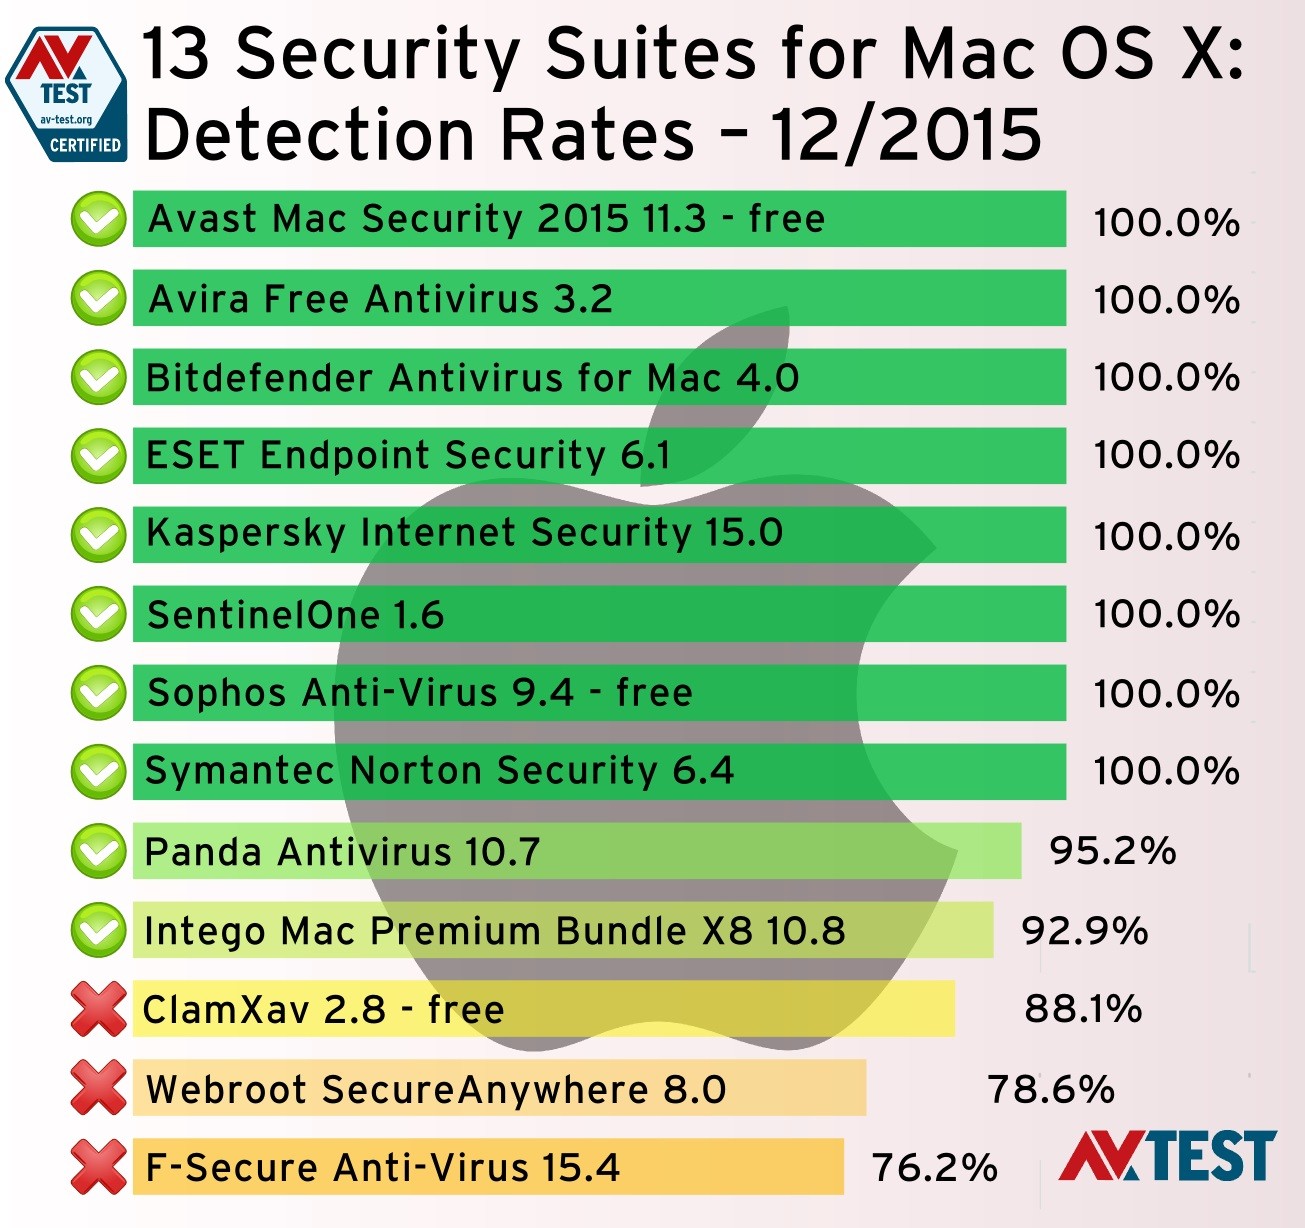 is there any free antivirus software for mac